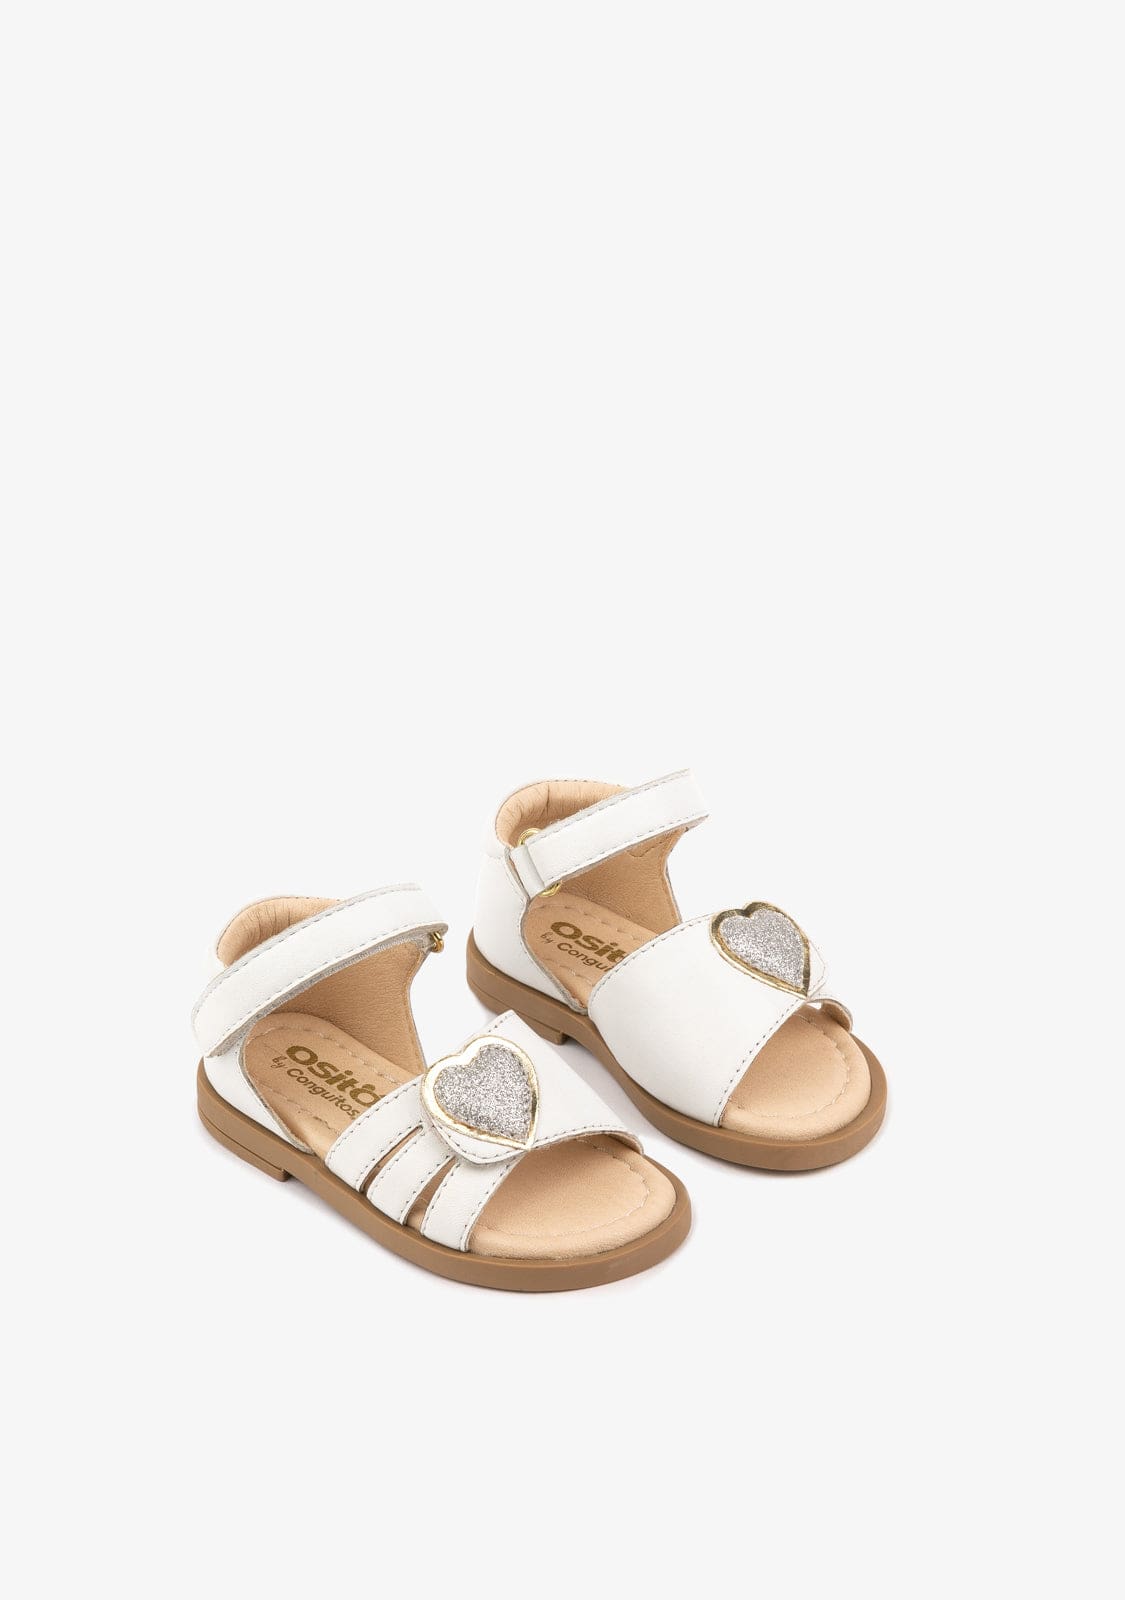 OSITO Shoes Baby's White Heart Sandals Napa